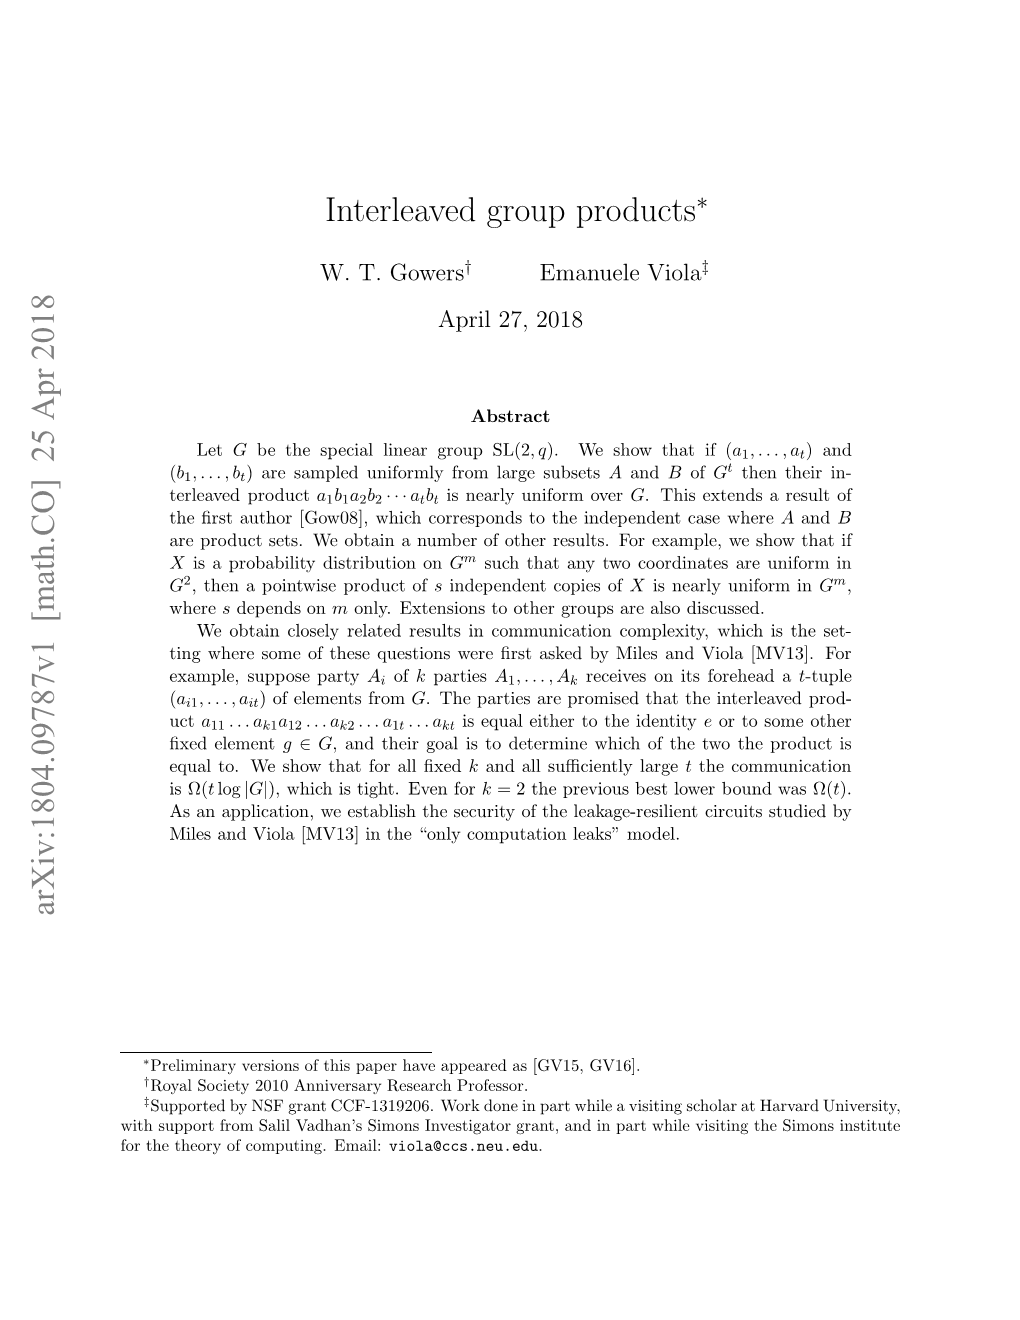 Interleaved Group Products